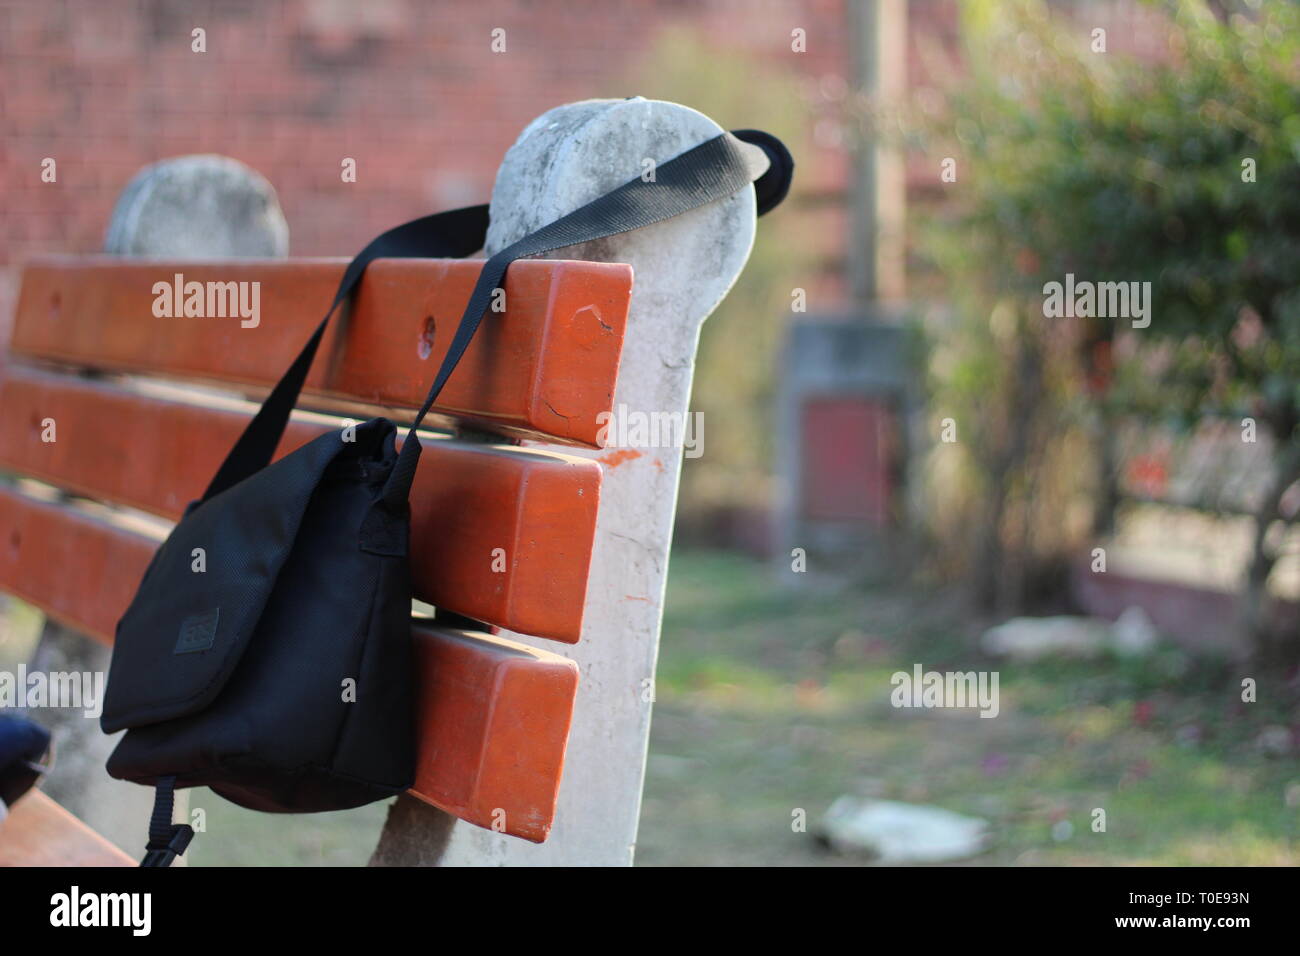 canon camera bag hanging on chair Stock Photo